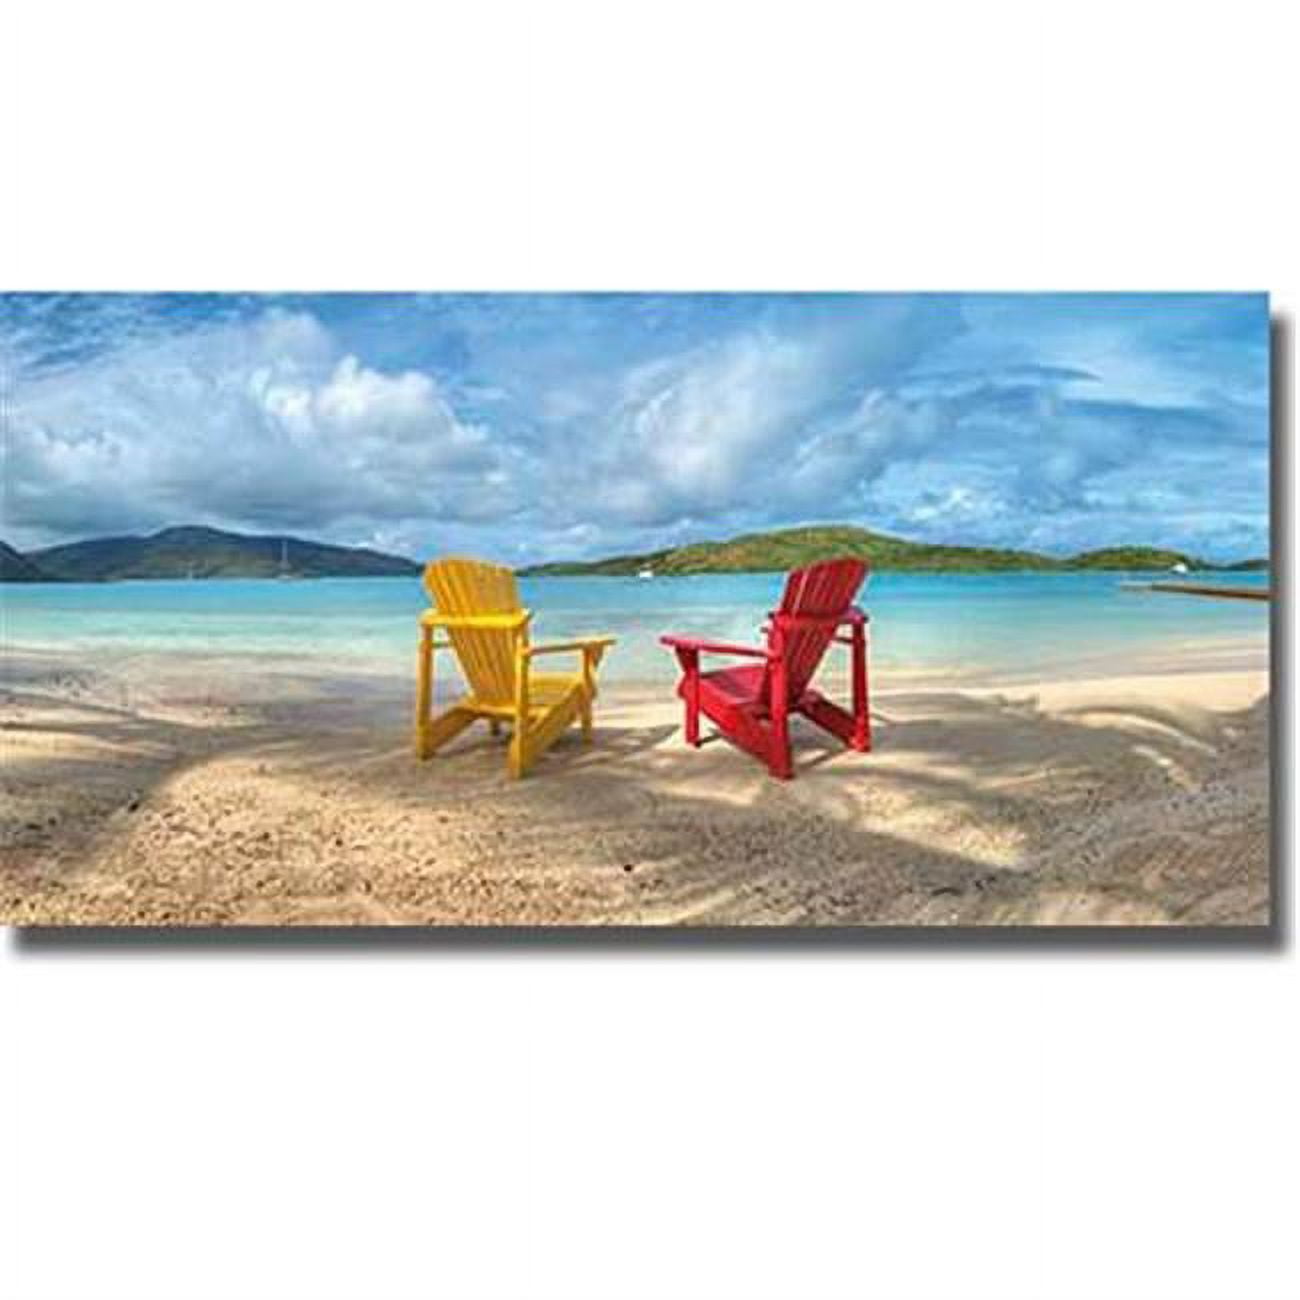 1224c709eg Two Tickets To Paradise By Doug Cavanah Premium Gallery-wrapped Canvas Giclee Art - Ready To Hang, 12 X 24 X 1.5 In.